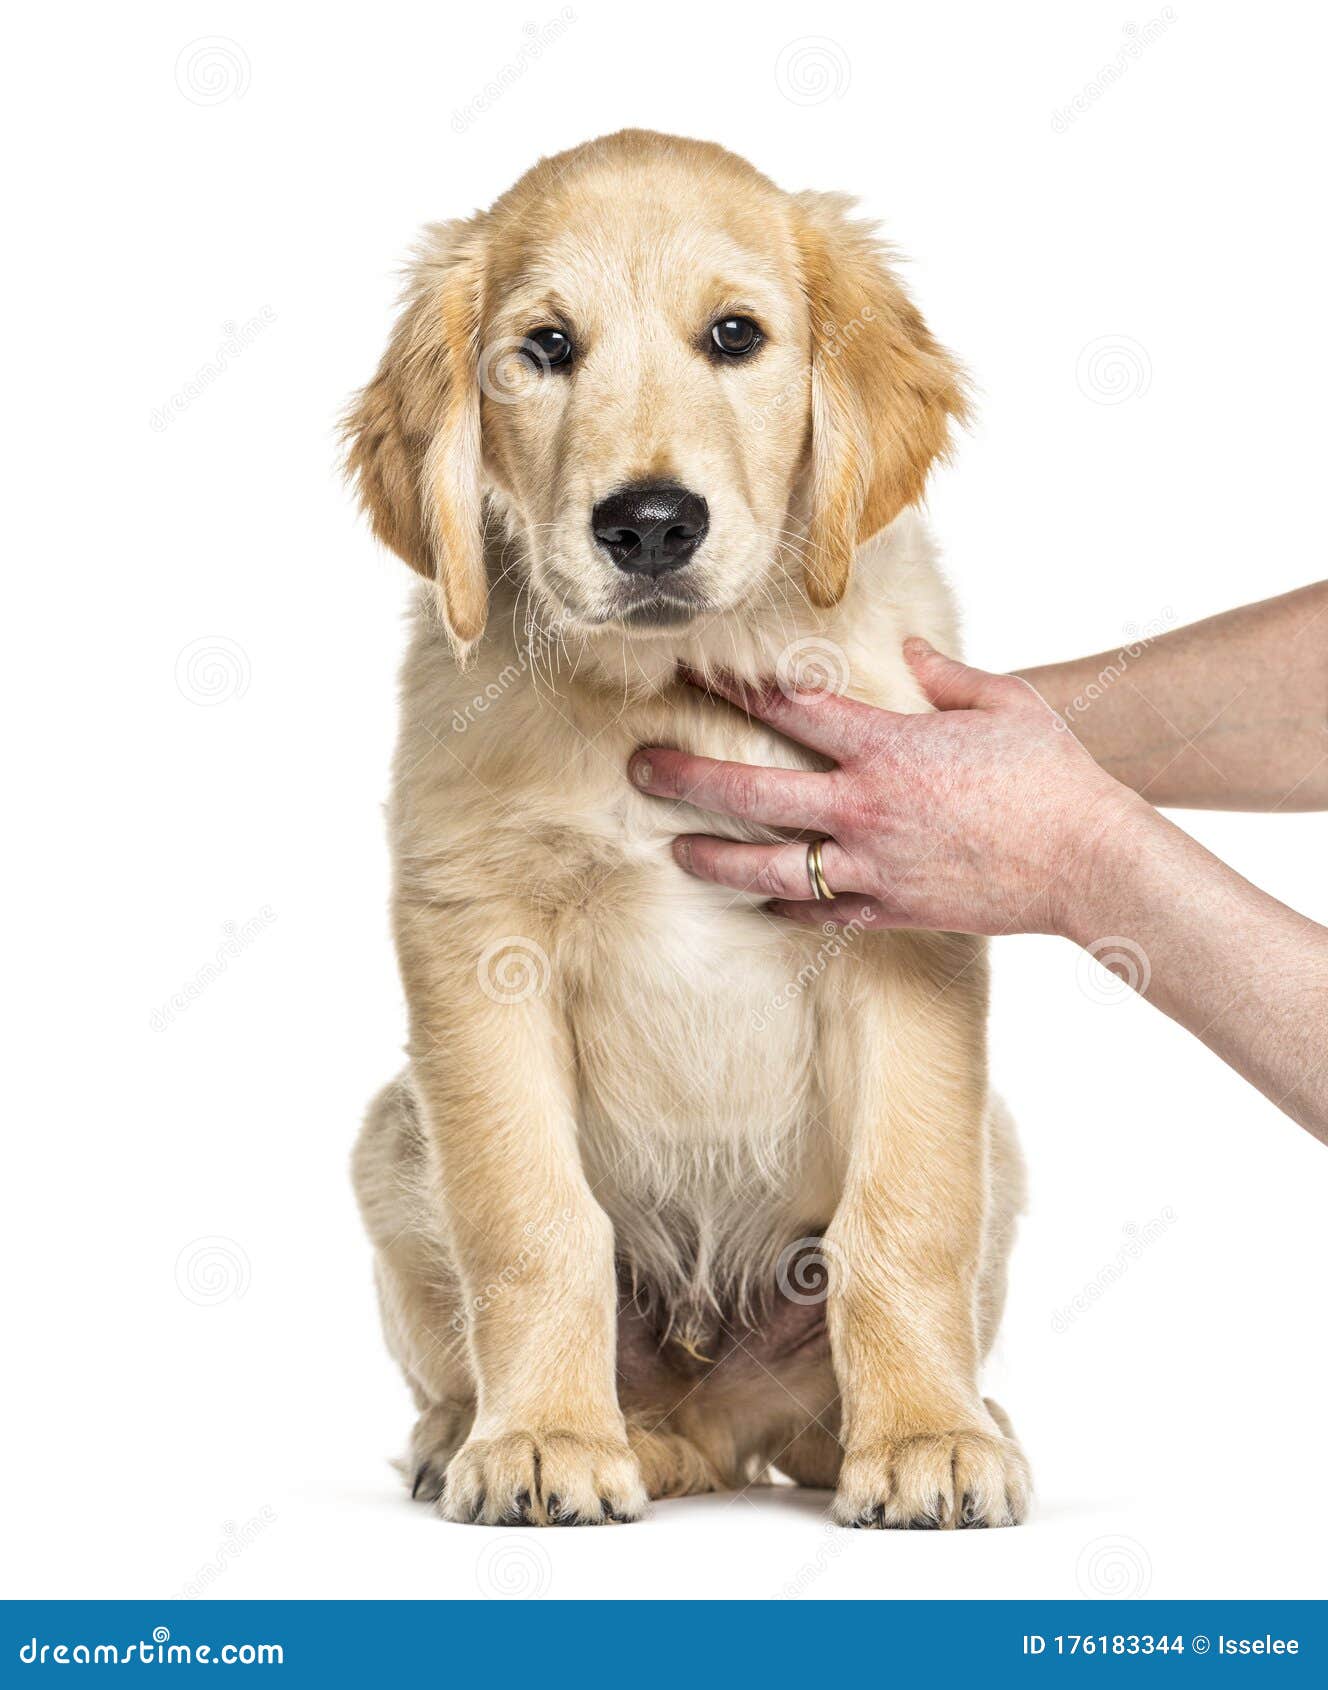 Training Session With A Puppy Golden Retriever 3 Months Old Stock Photo Image Of Human Education 176183344